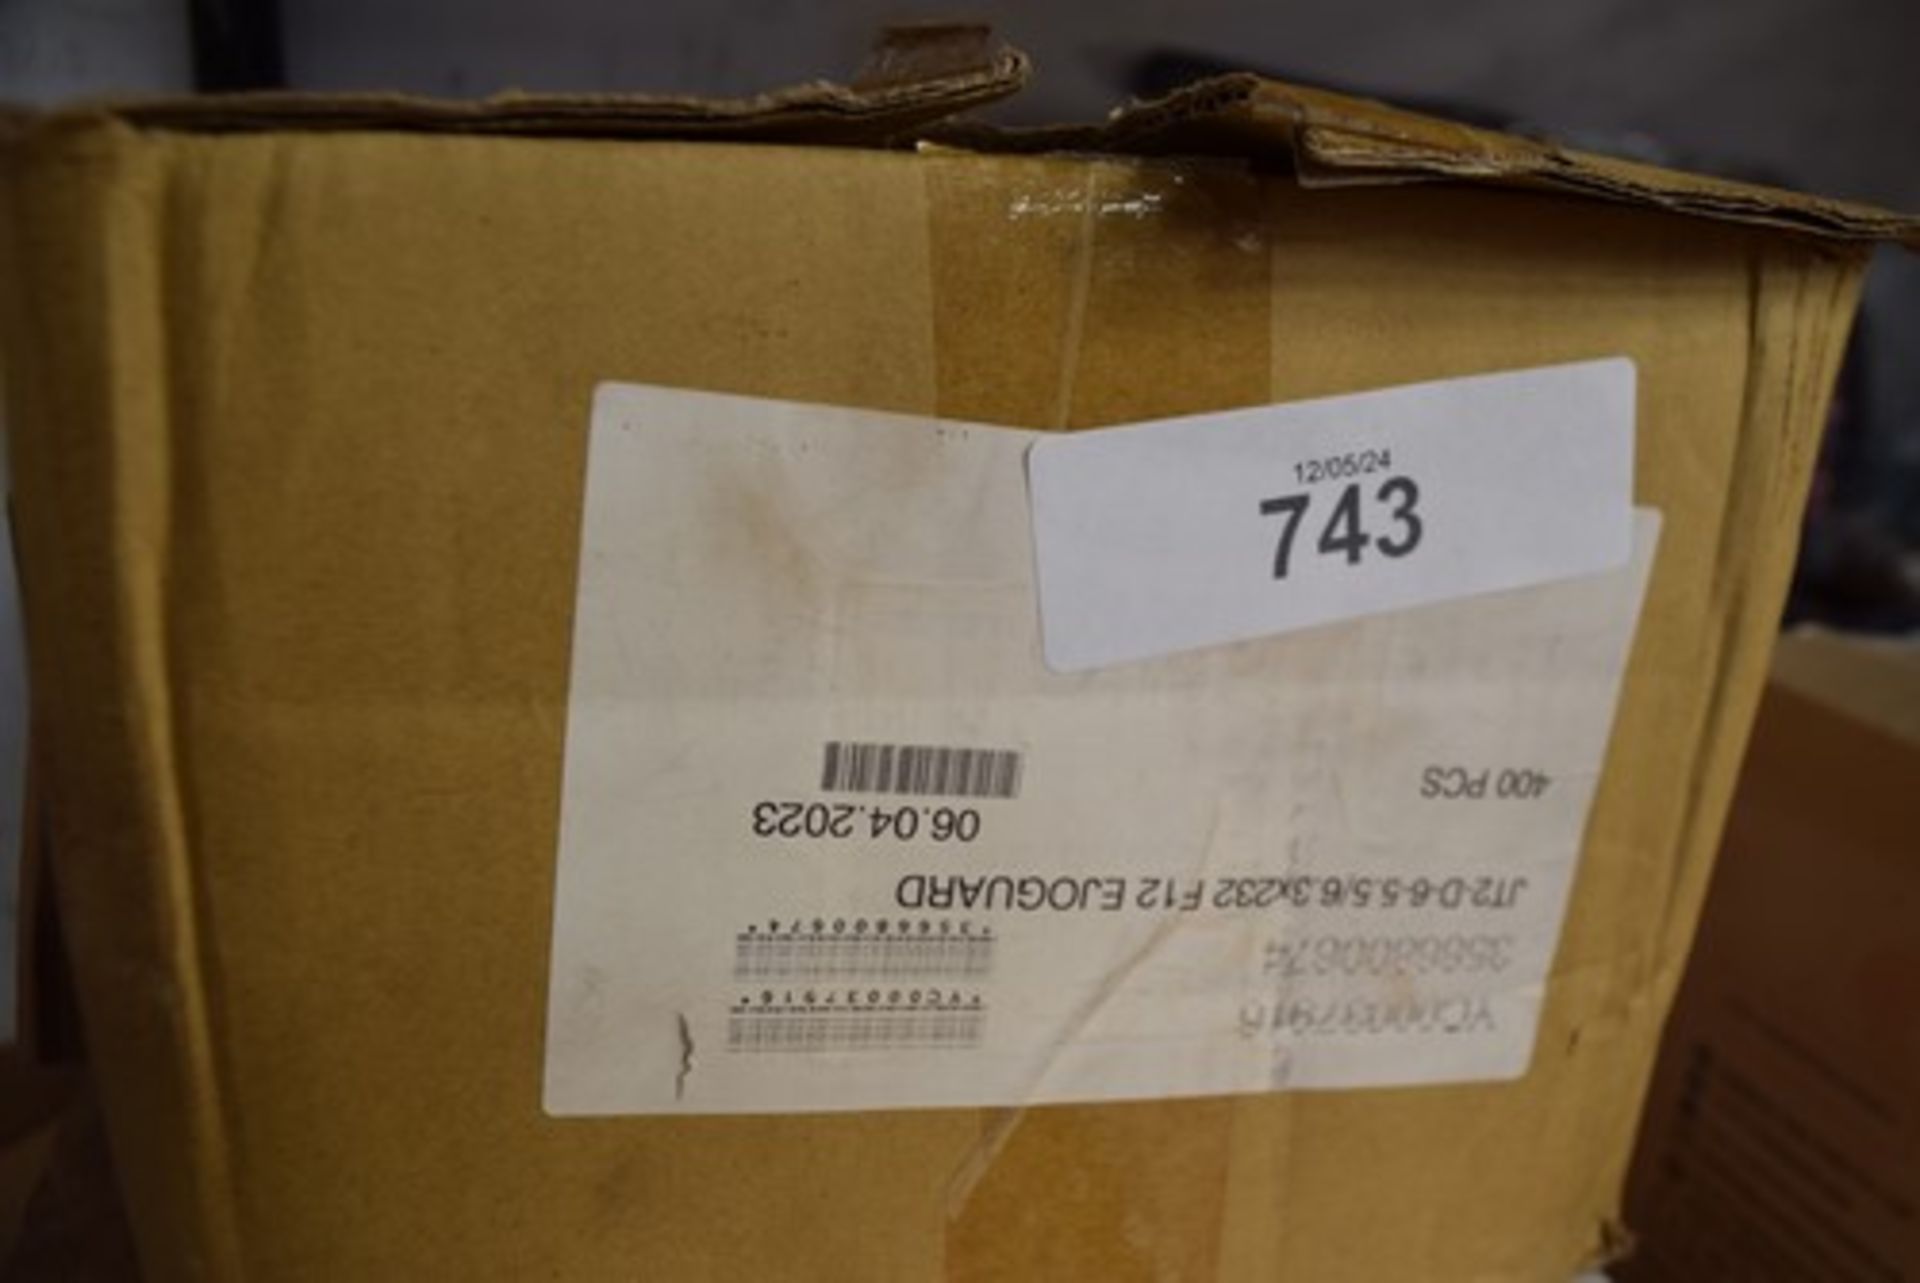 1 x box of Evolution wafer head self drilling drew wall screws, size 4.2 x 12mm, approximately 10, - Image 4 of 4